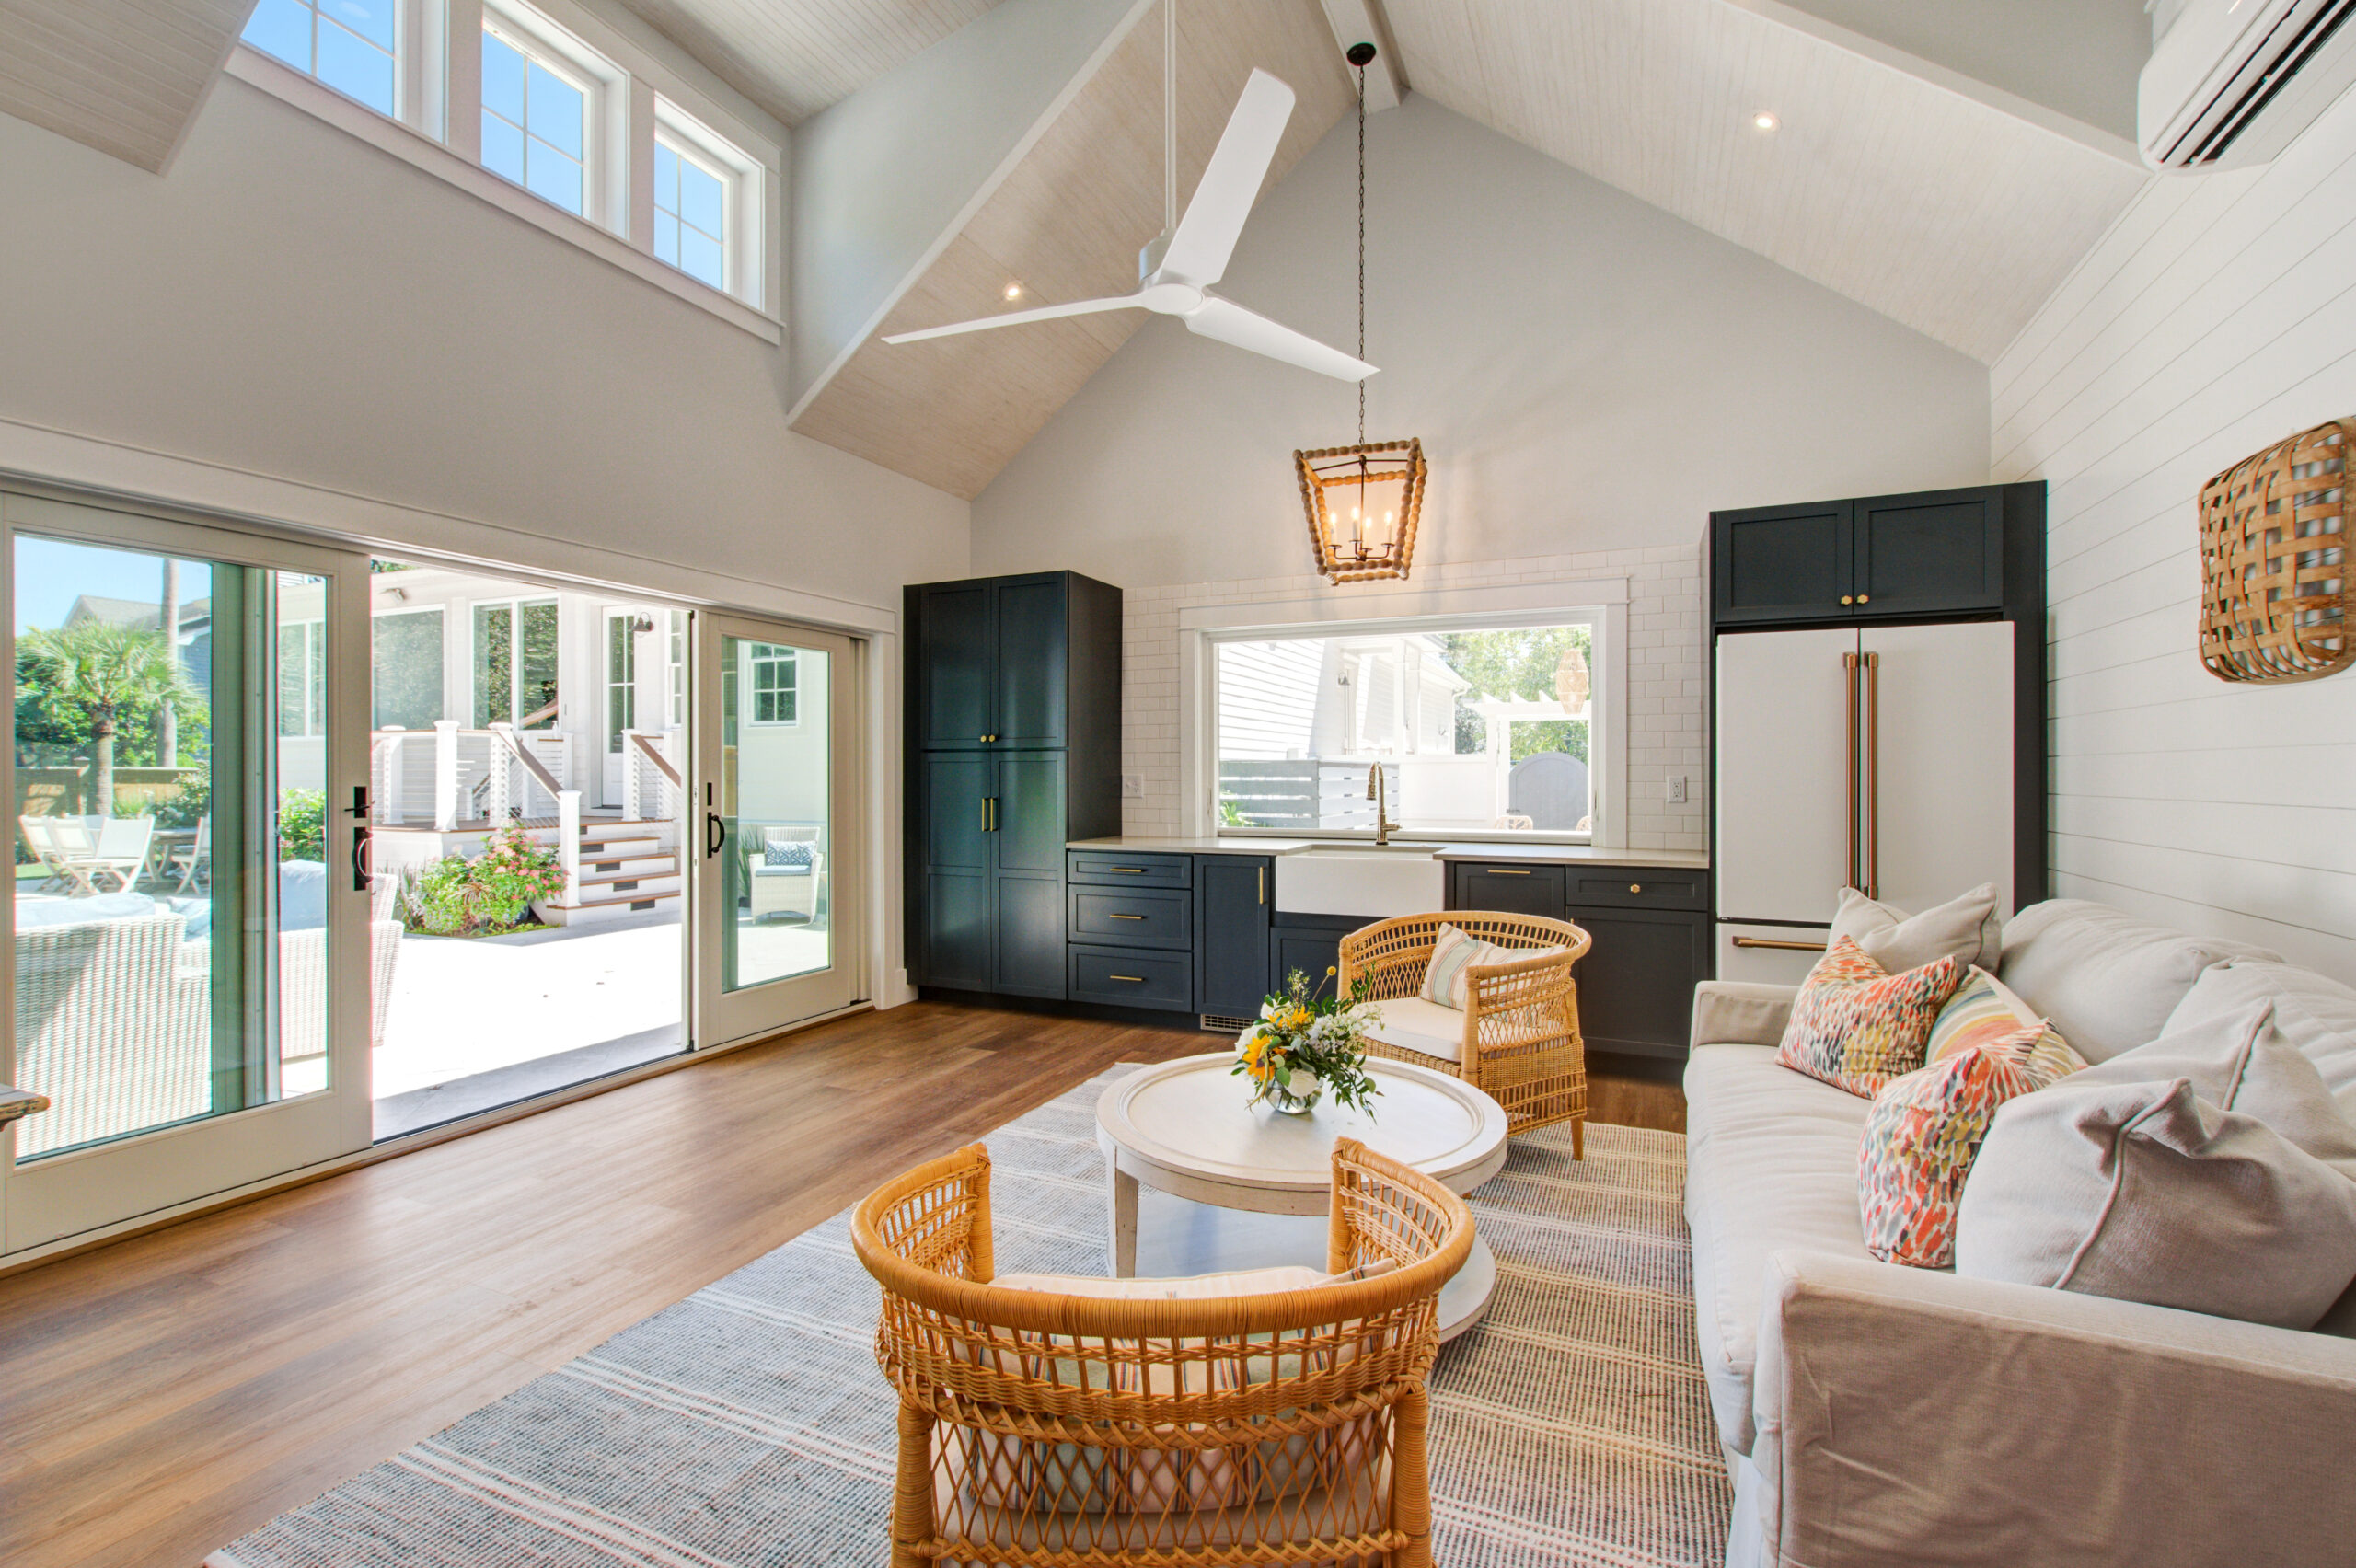 Living Space with vaulted ceilings, skyline windows, sliding glass doors, and wood floors allows for indoor - outdoor living -- Ck Contracting - Custom Home Renovations -- Mount Pleasant, SC.